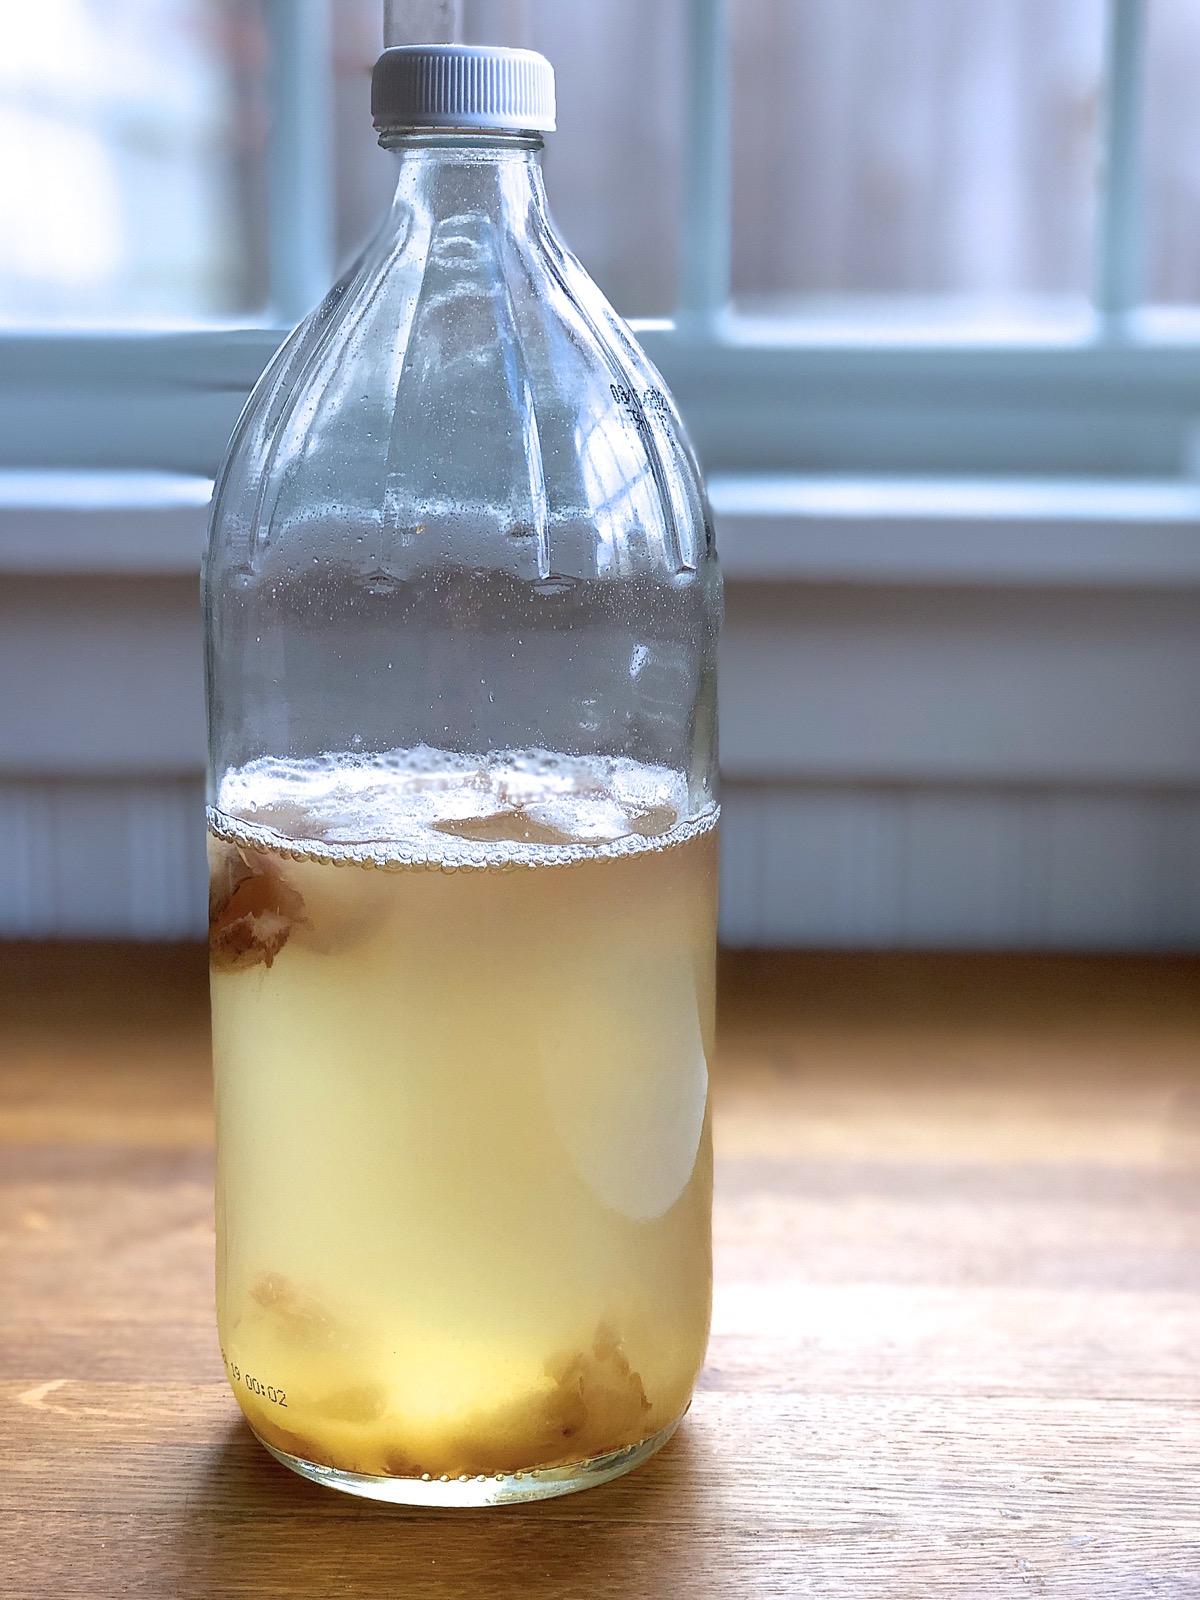 Bottle of yeast water sitting on a wooden table.